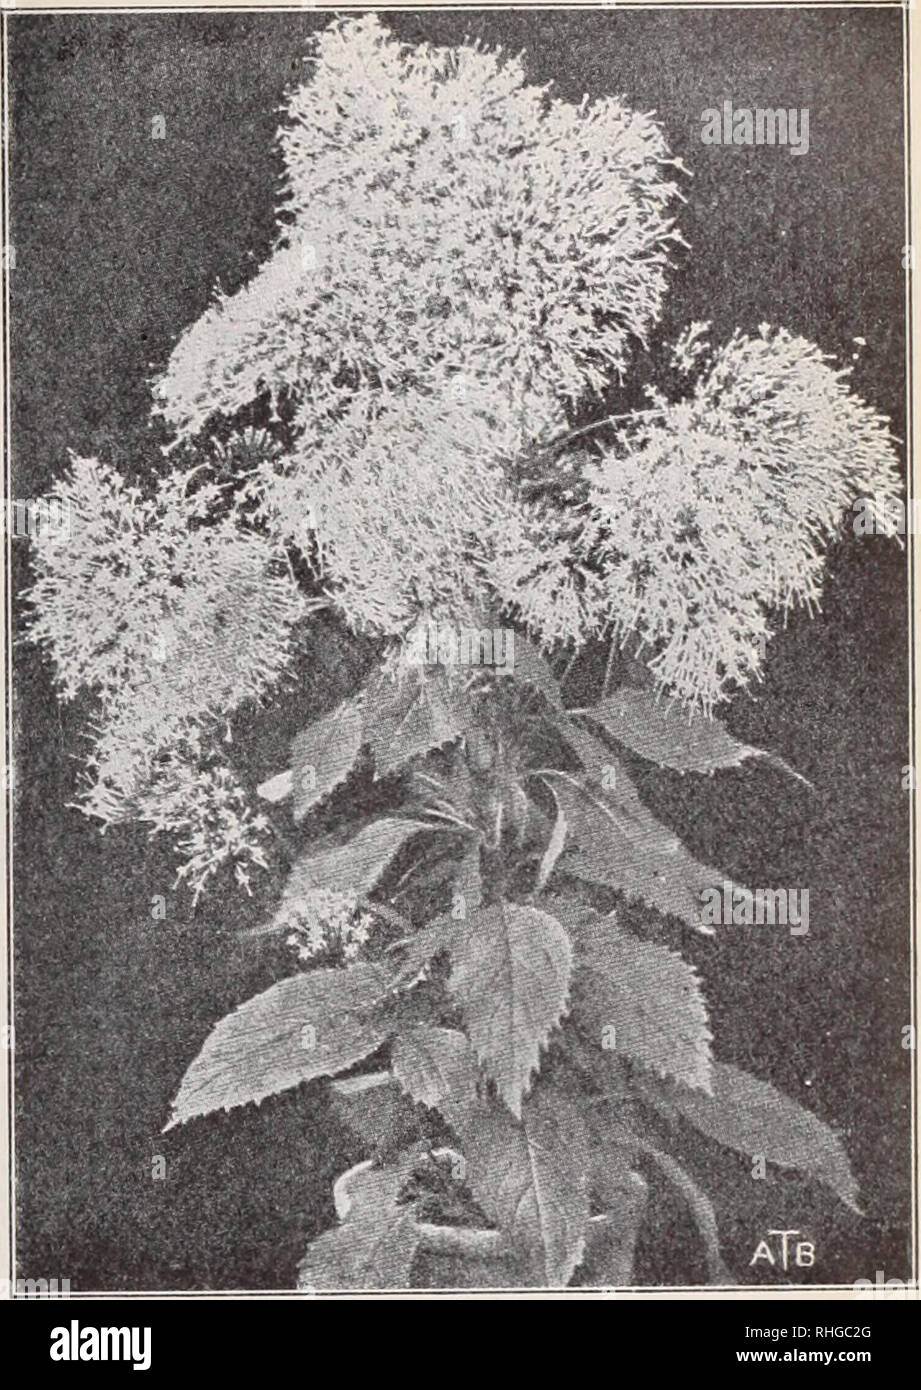 . Boddington's quality bulbs, seeds and plants / Arthur T. Boddington.. Nursery Catalogue. Boddington's Quality ZinniaB (See page 44) Trachelium caeruleum VERBASCUM (Mullein). H.P. Pkt. Blattaria alba giganteum. 4 ft. White. Jul to Sept $0 50 Libani. 4 ft. Yellow. July to September 10 Olympicum. 6 ft. Yellow. July to September 10 Phoeniceum. ijring 10. 250 &quot; White Perfection, '..ft. White. Spring 10 a&gt; 50 &quot; Purple Queen. Blue 10 8 jq, &quot; lutea. 'â ft Ncllow. Spring 10 2 jb &quot; lutea splendens. ft. drange. Spring 10 2 50 &quot; Mixed 10 2 00. Please note that these images a Stock Photo